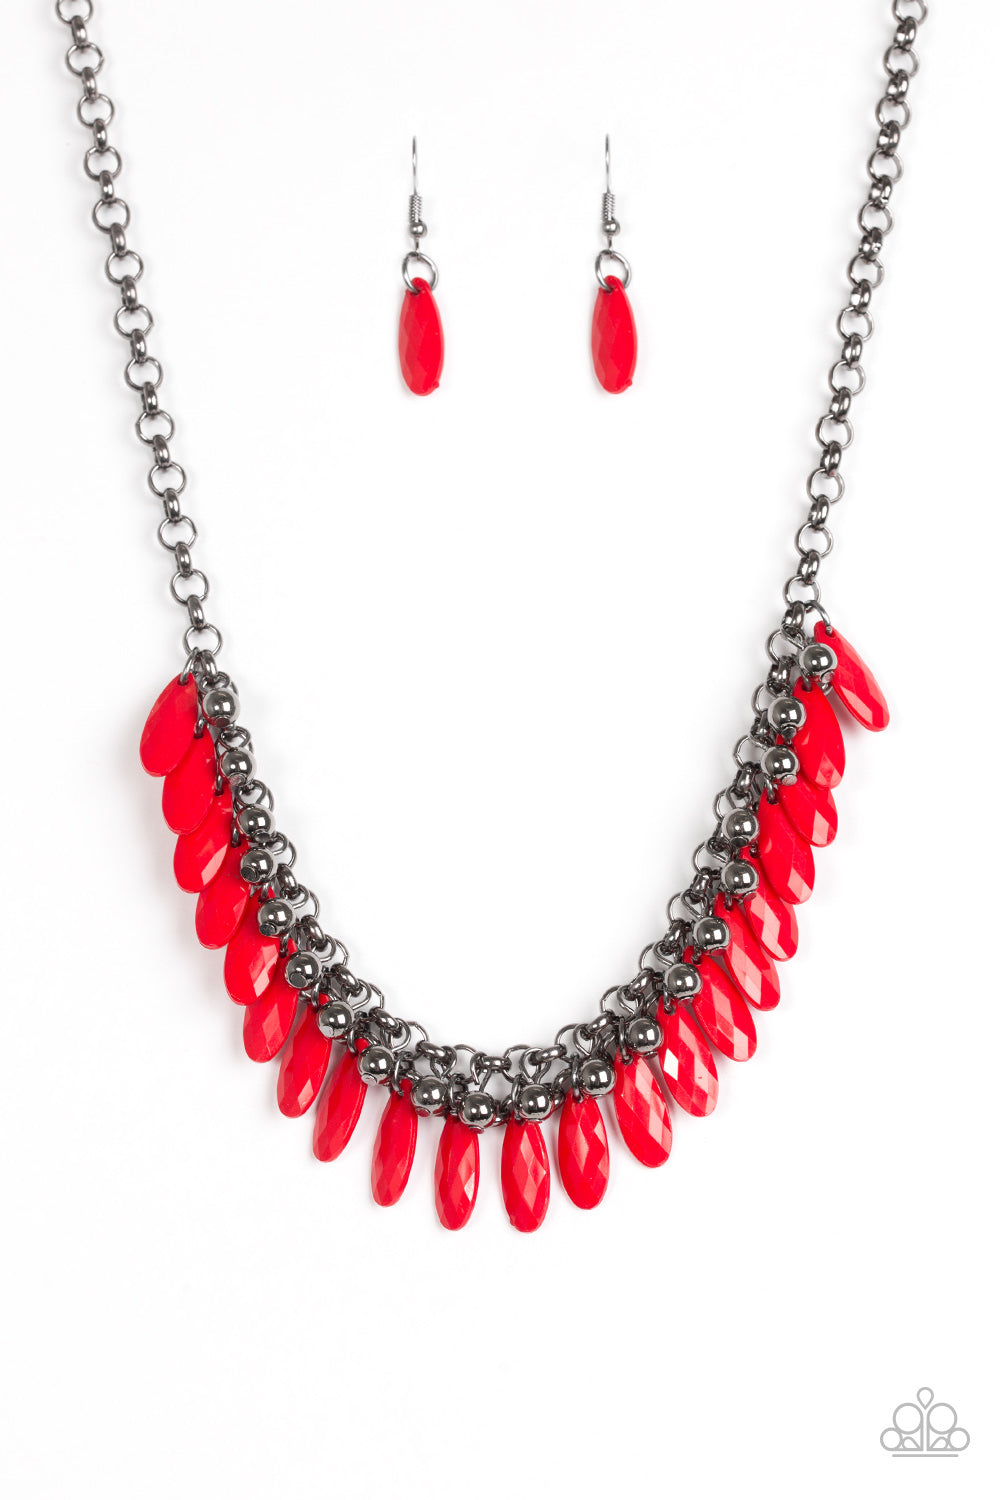 Jersey Shore - Red Necklace - TheMasterCollection